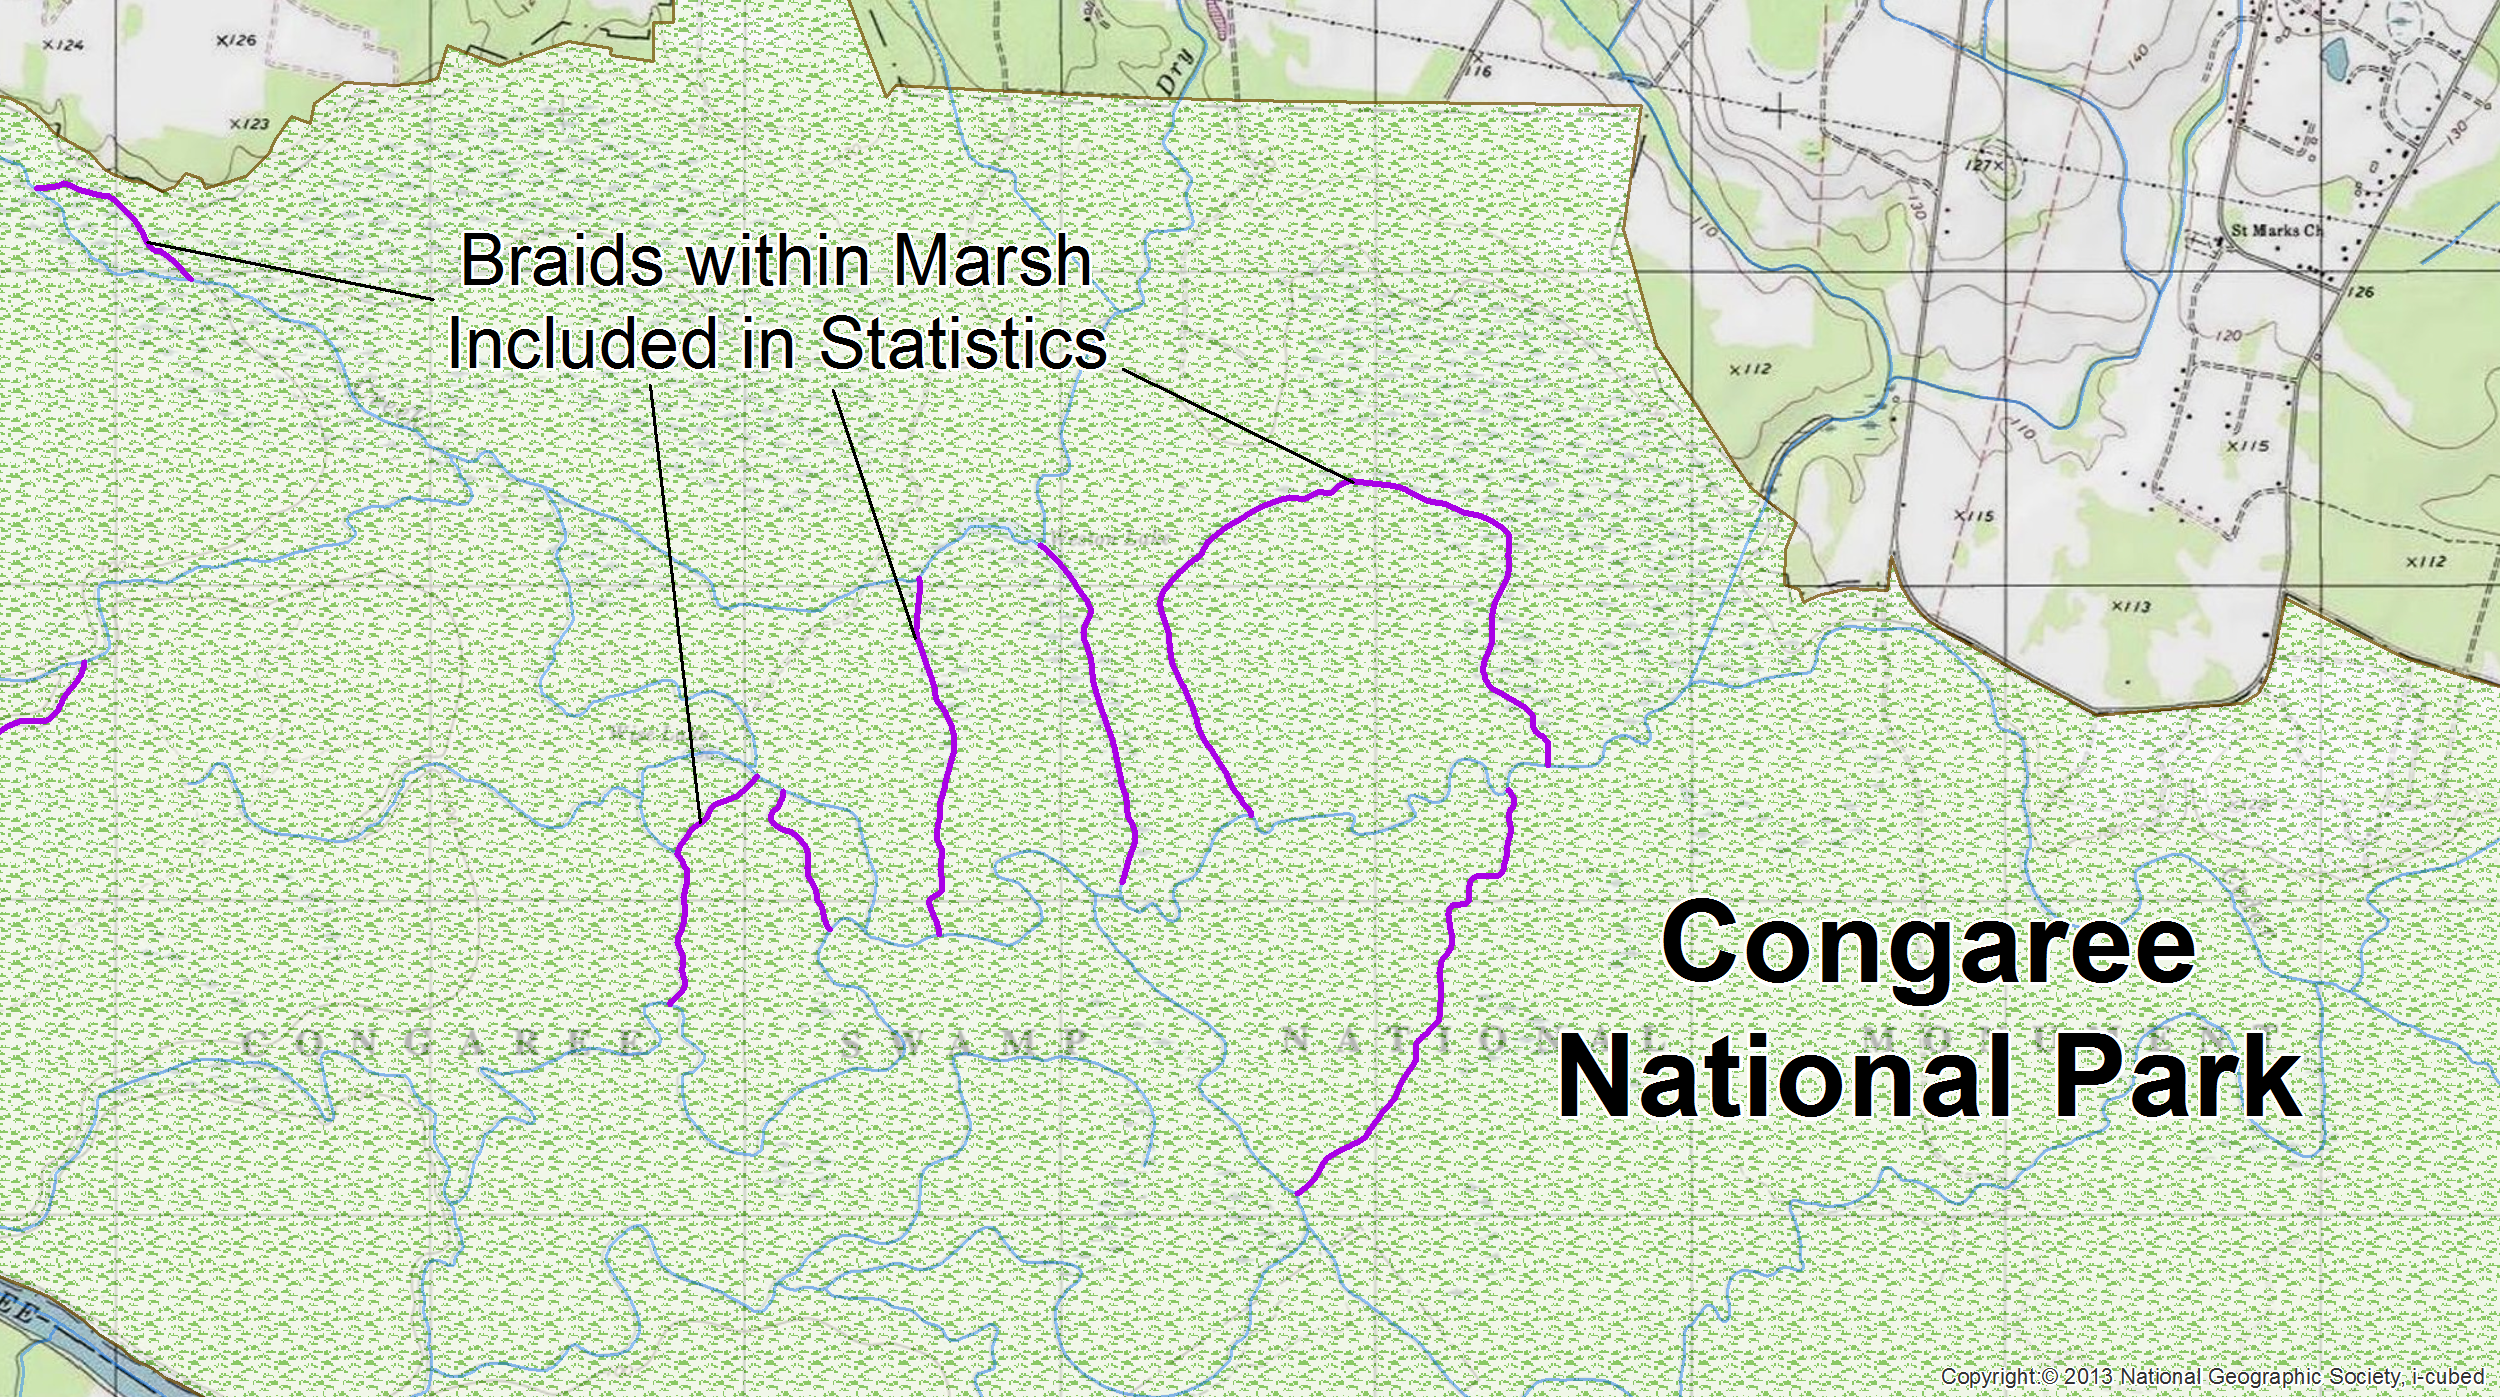 In Congaree National Park, several braids (purple) are distributed throughout the marsh. In these situations, all flowlines were tagged as centerlines and included in the stream statistics.